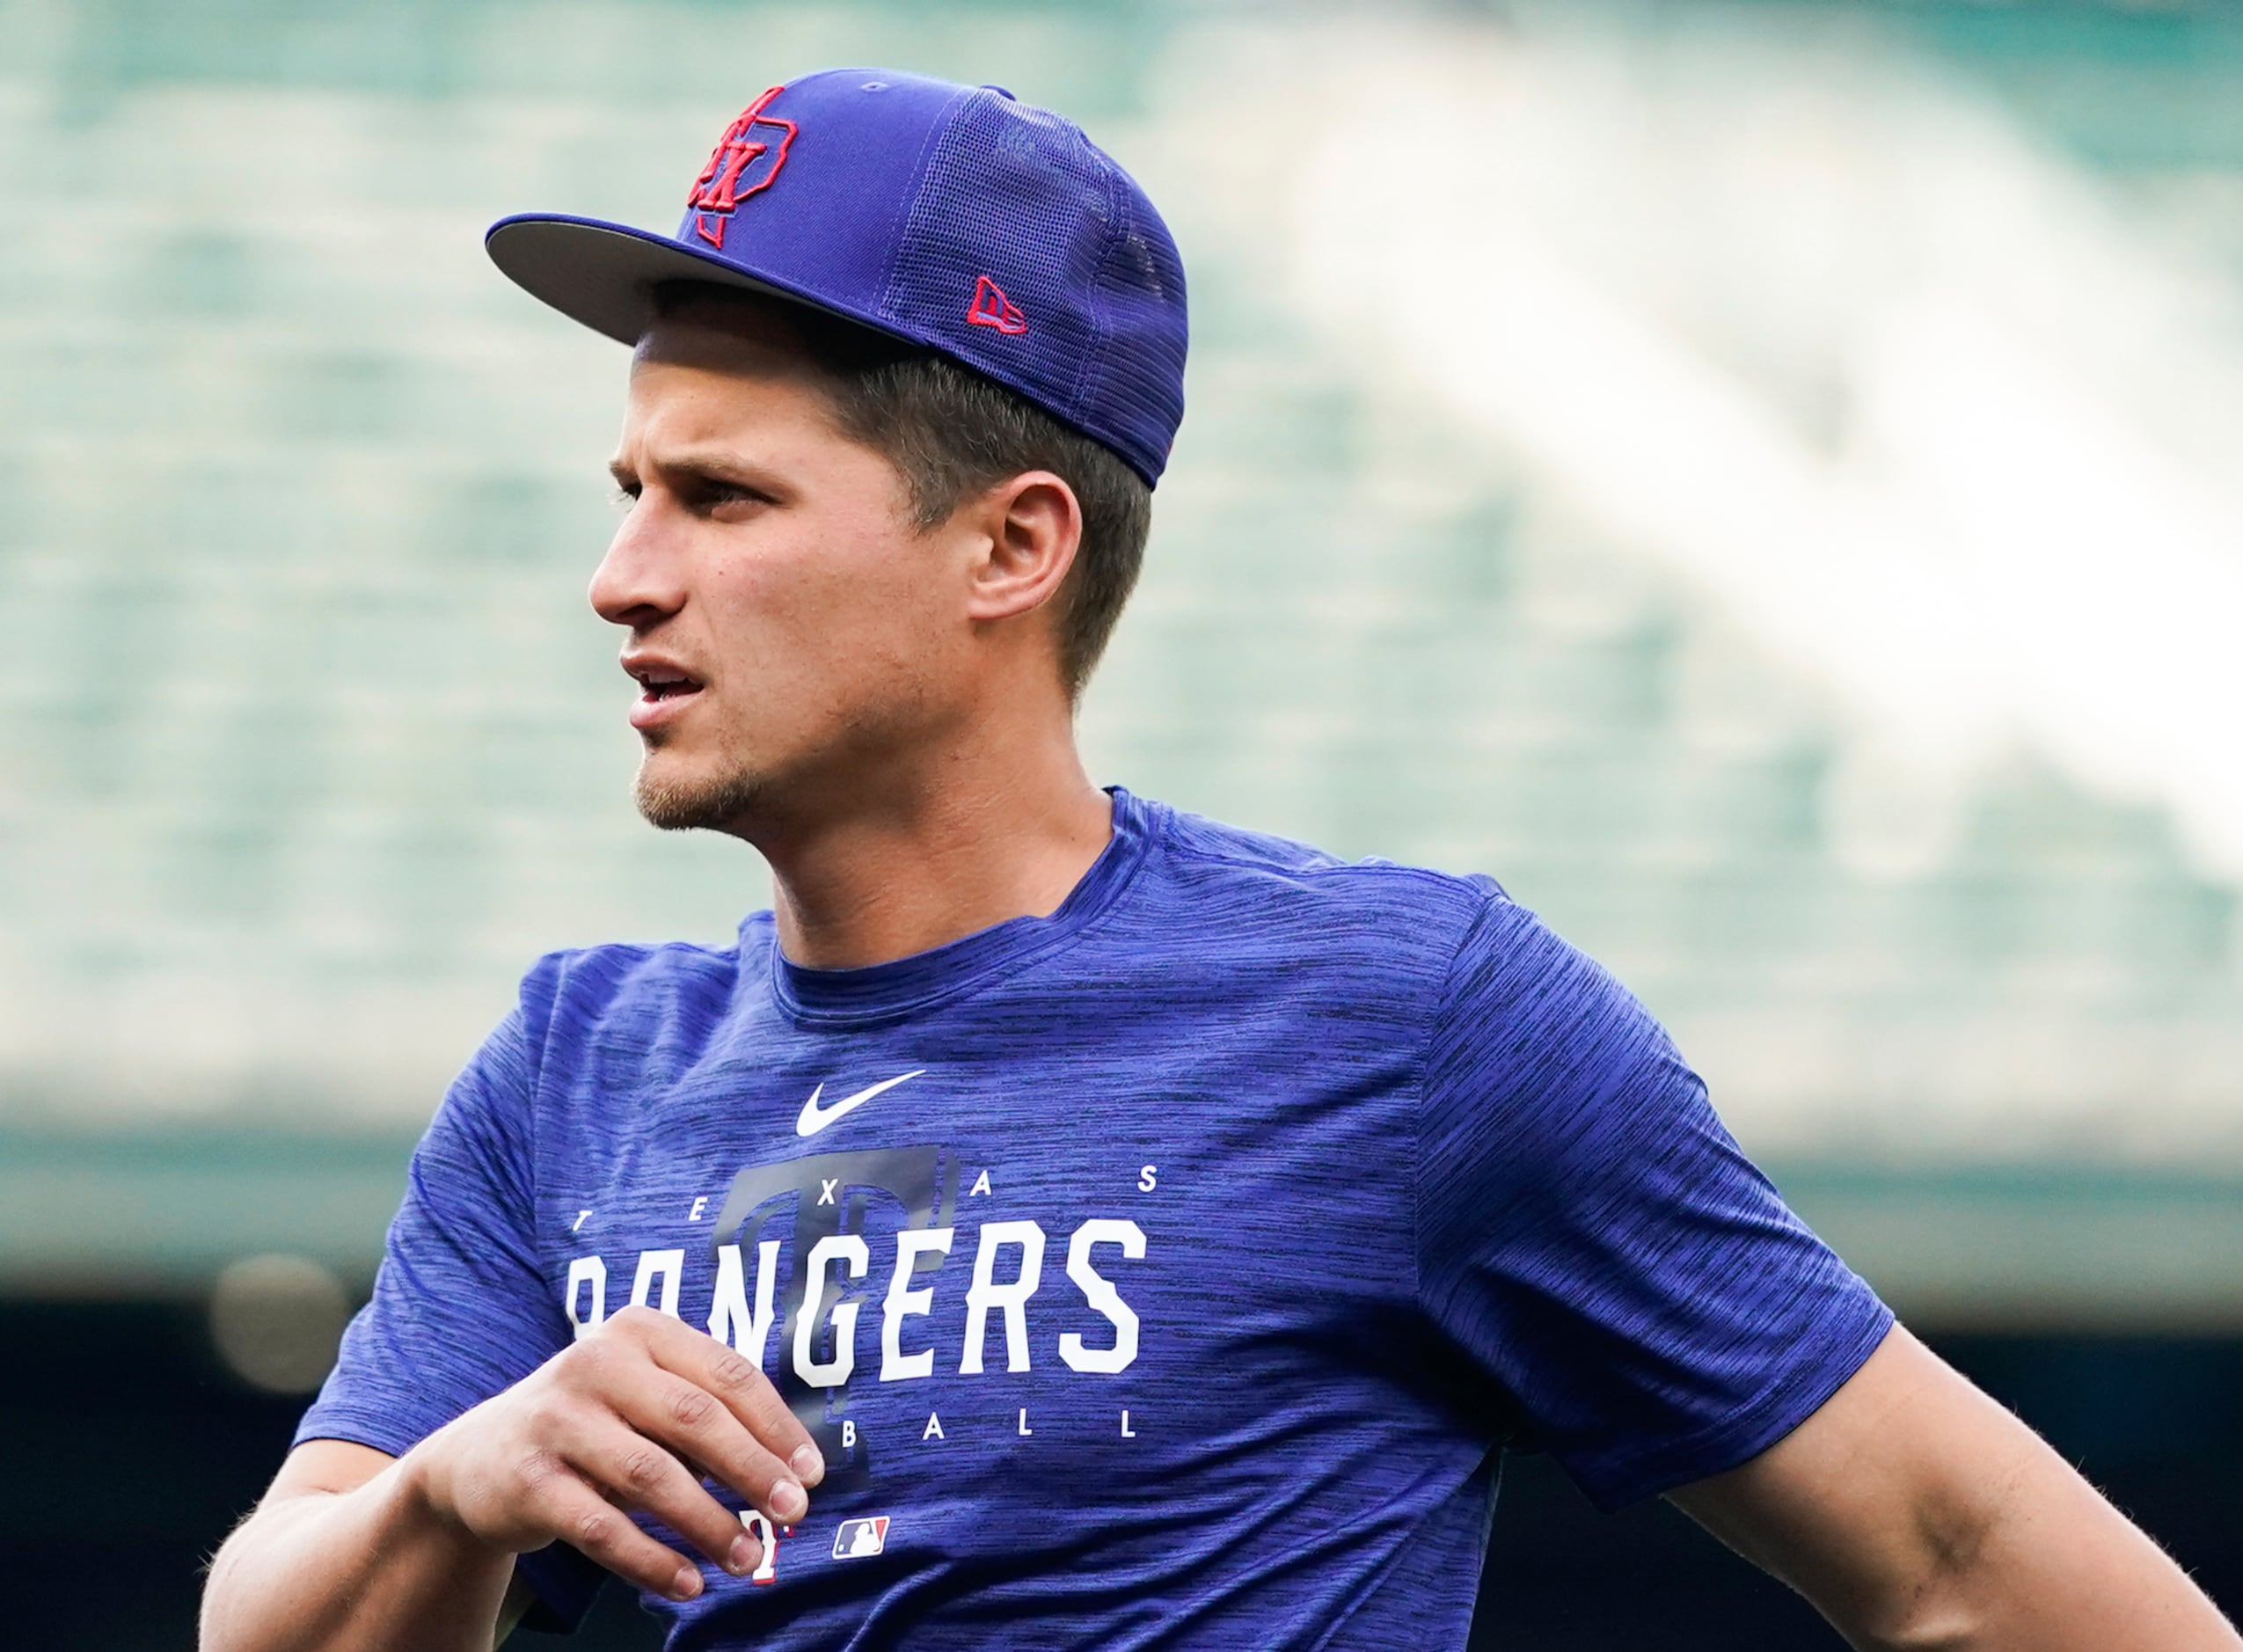 Rangers shortstop Corey Seager doubles, drives in two runs in first rehab  game